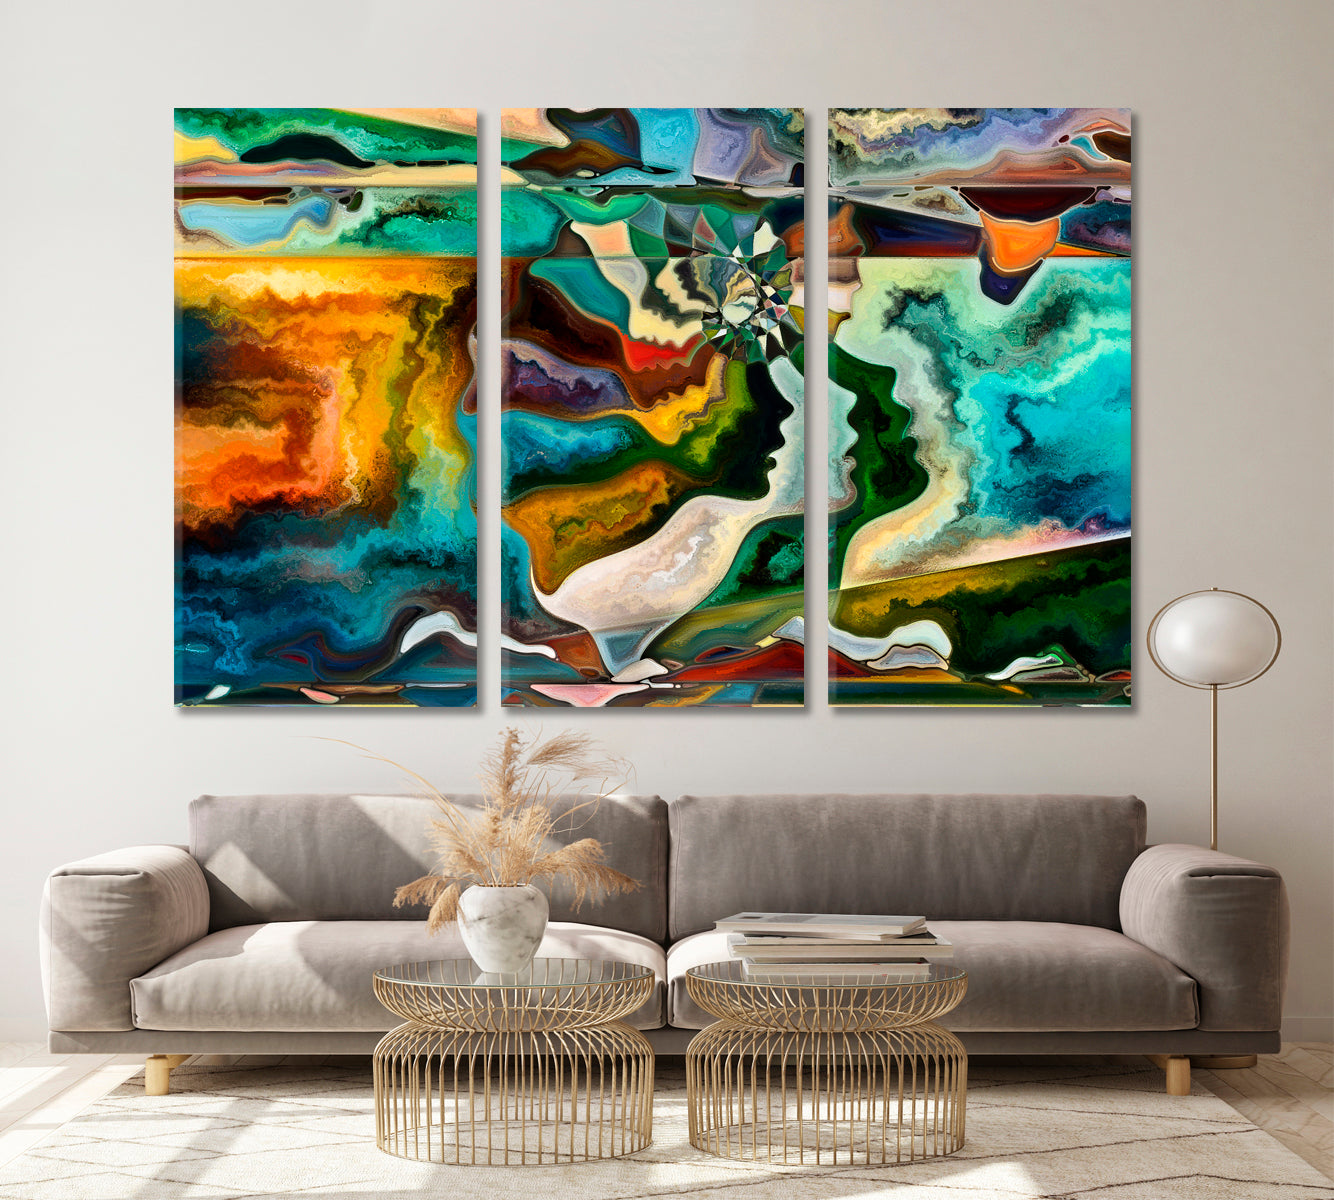 INTERWEAVING FLOW Inner World People and Forms Abstract Art Print Artesty 3 panels 36" x 24" 